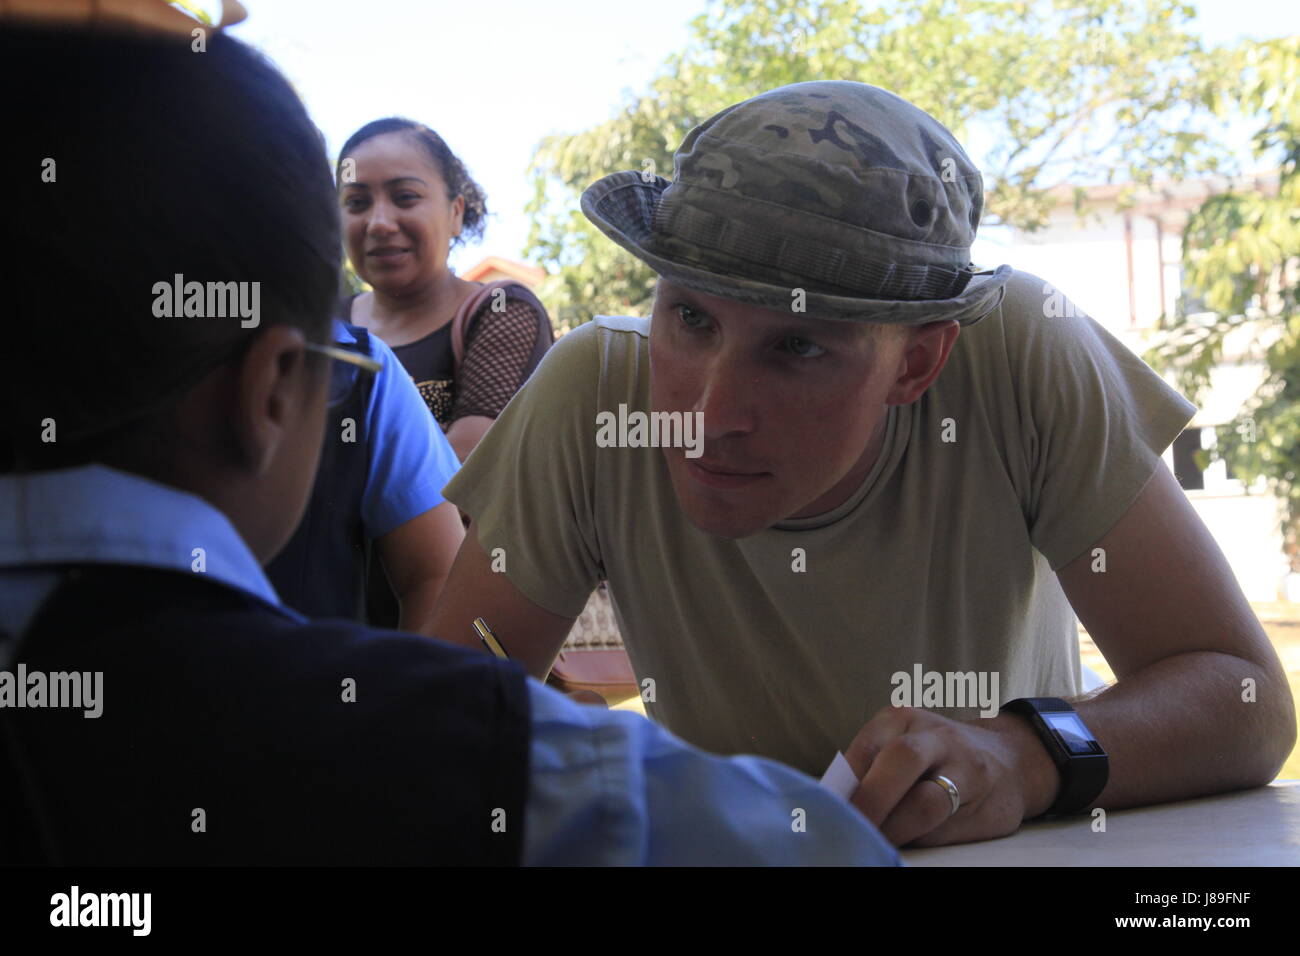 U.S. Army Spc. Kyle Grimshaw, with the 344th Psychological Operations Company (Airborne), based out of Austin, Texas, checks local students from a nearby elementary school into a medical readiness event during Beyond the Horizon 2017, in San Ignacio, Belize, May 15, 2017. BTH 2017 is a U.S. Southern Command-sponsored, Army South-led exercise designed to provide humanitarian and engineering services to communities in need, demonstrating U.S. support for Belize. (U.S. Army photo by Spc. Kelson Brooks) (RELEASED) Stock Photo